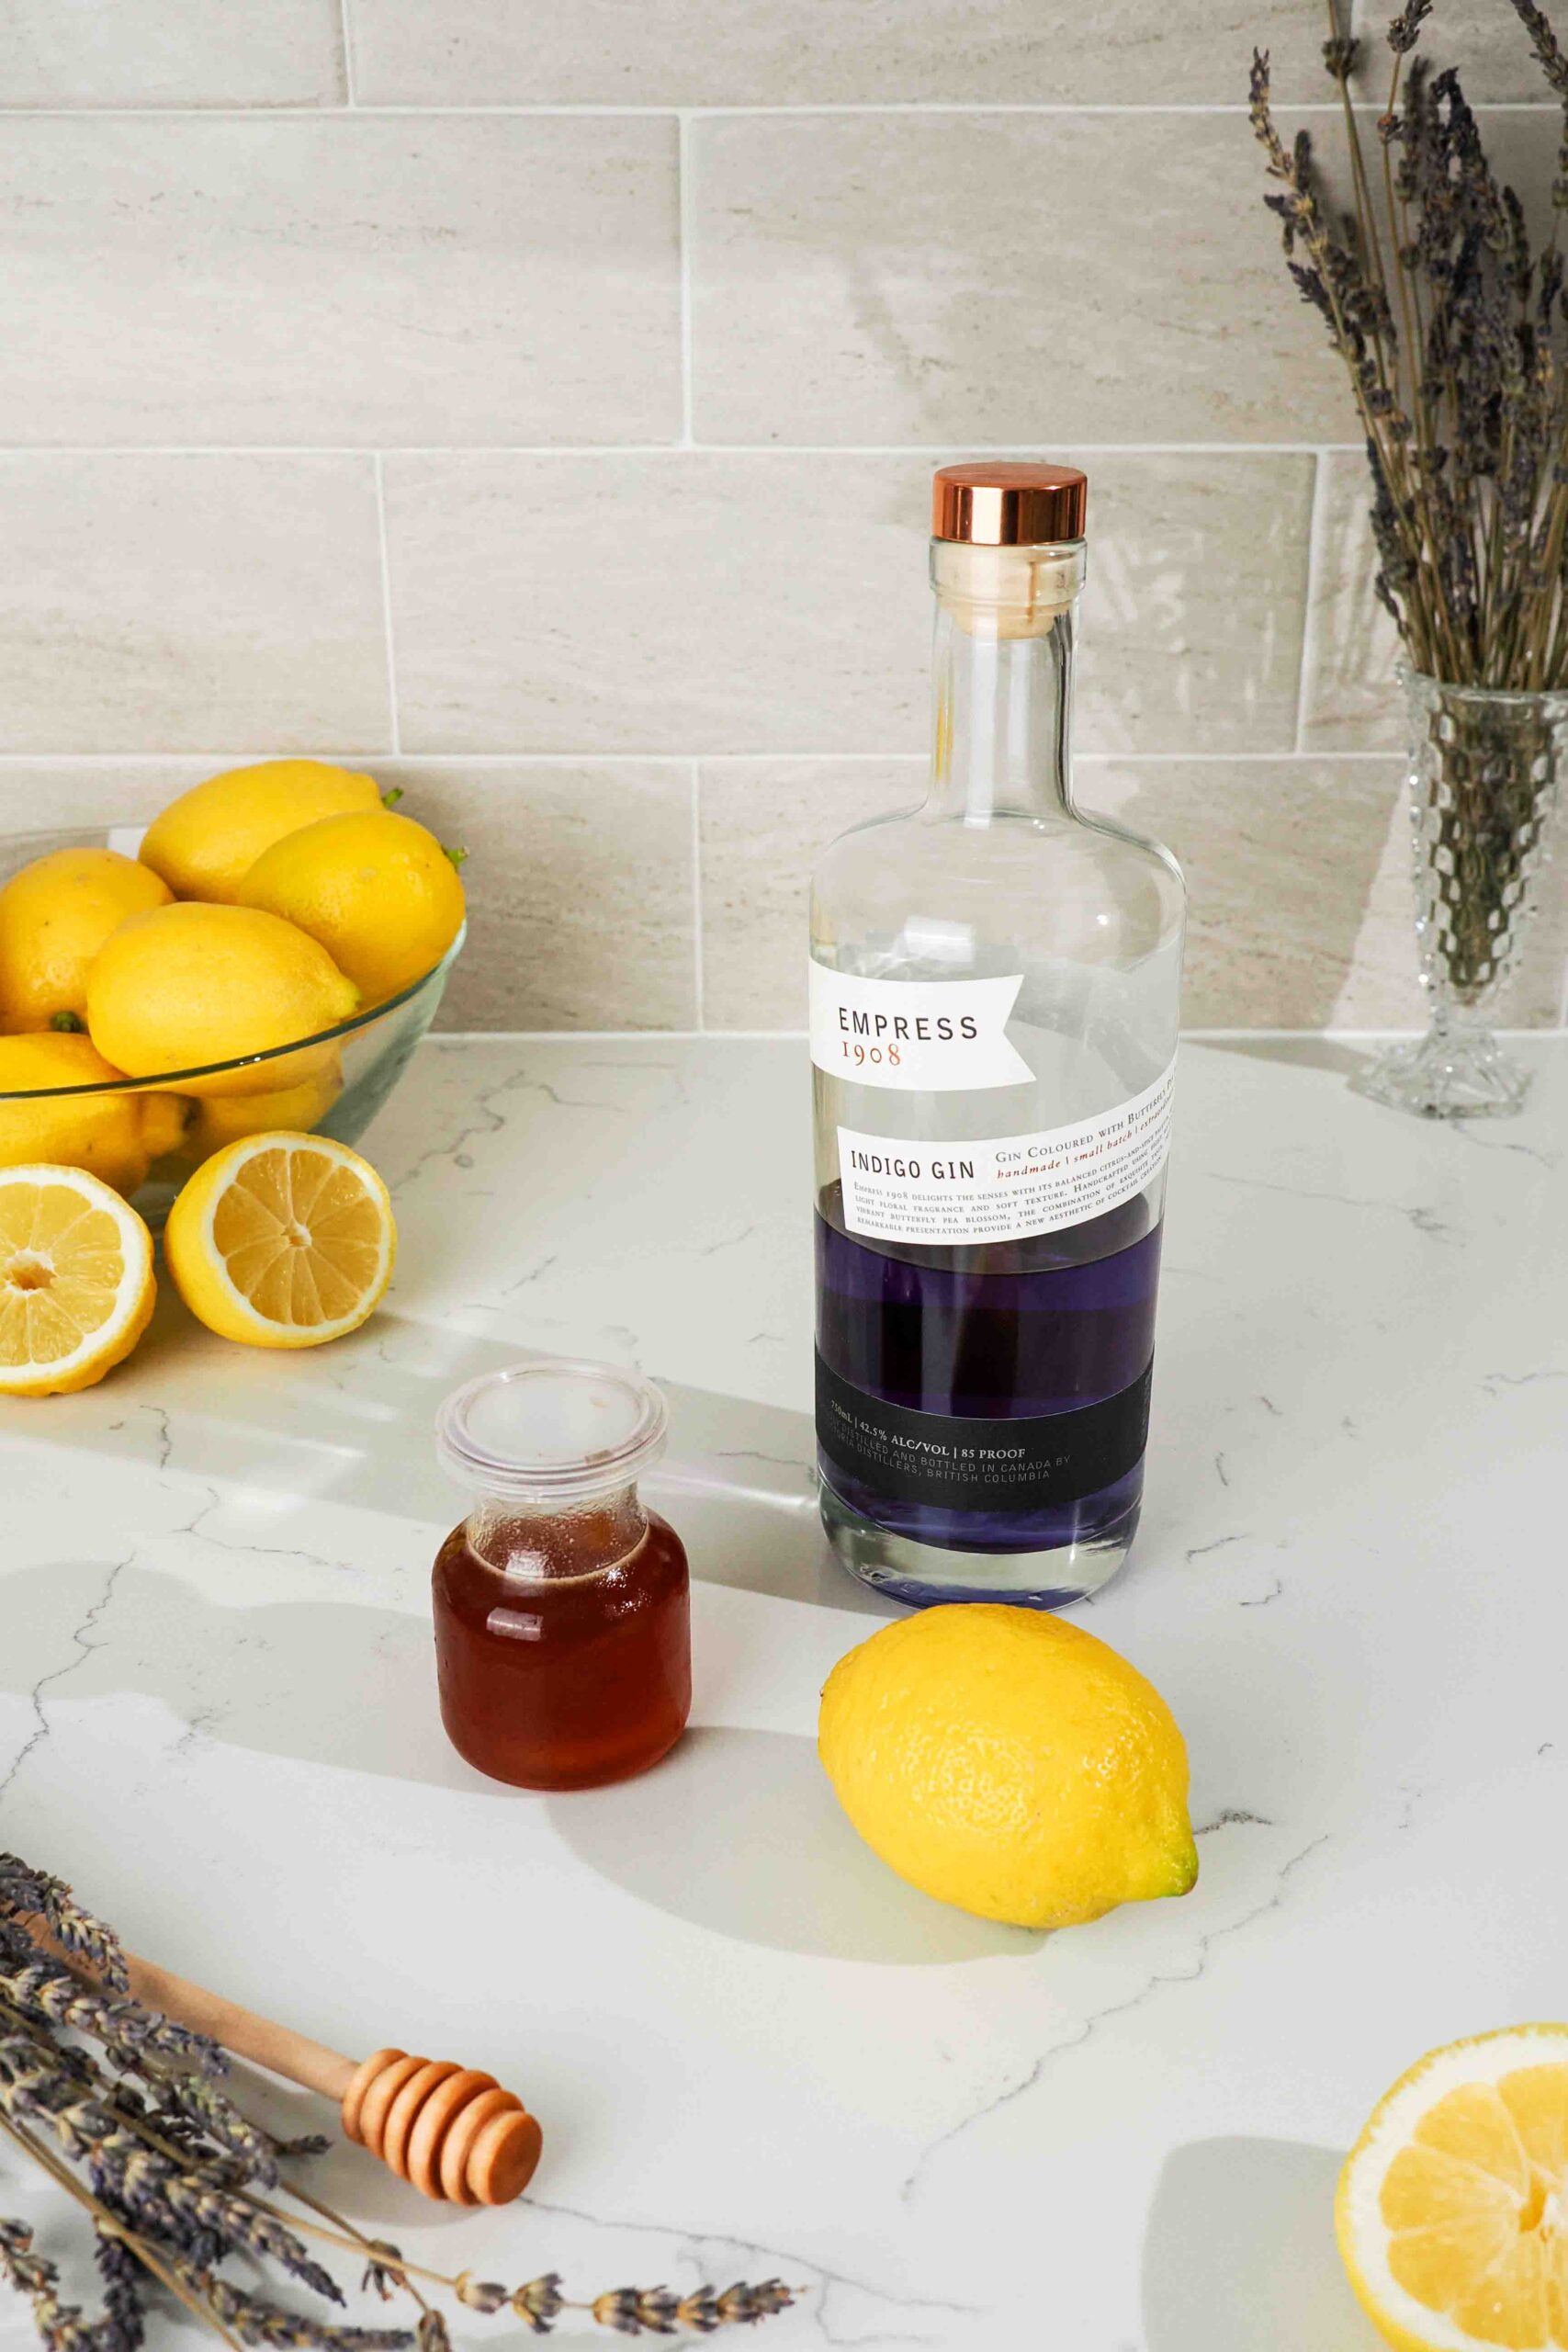 A bottle of botanical gin, honey lavender syrup, and a lemon on a quartz counter.